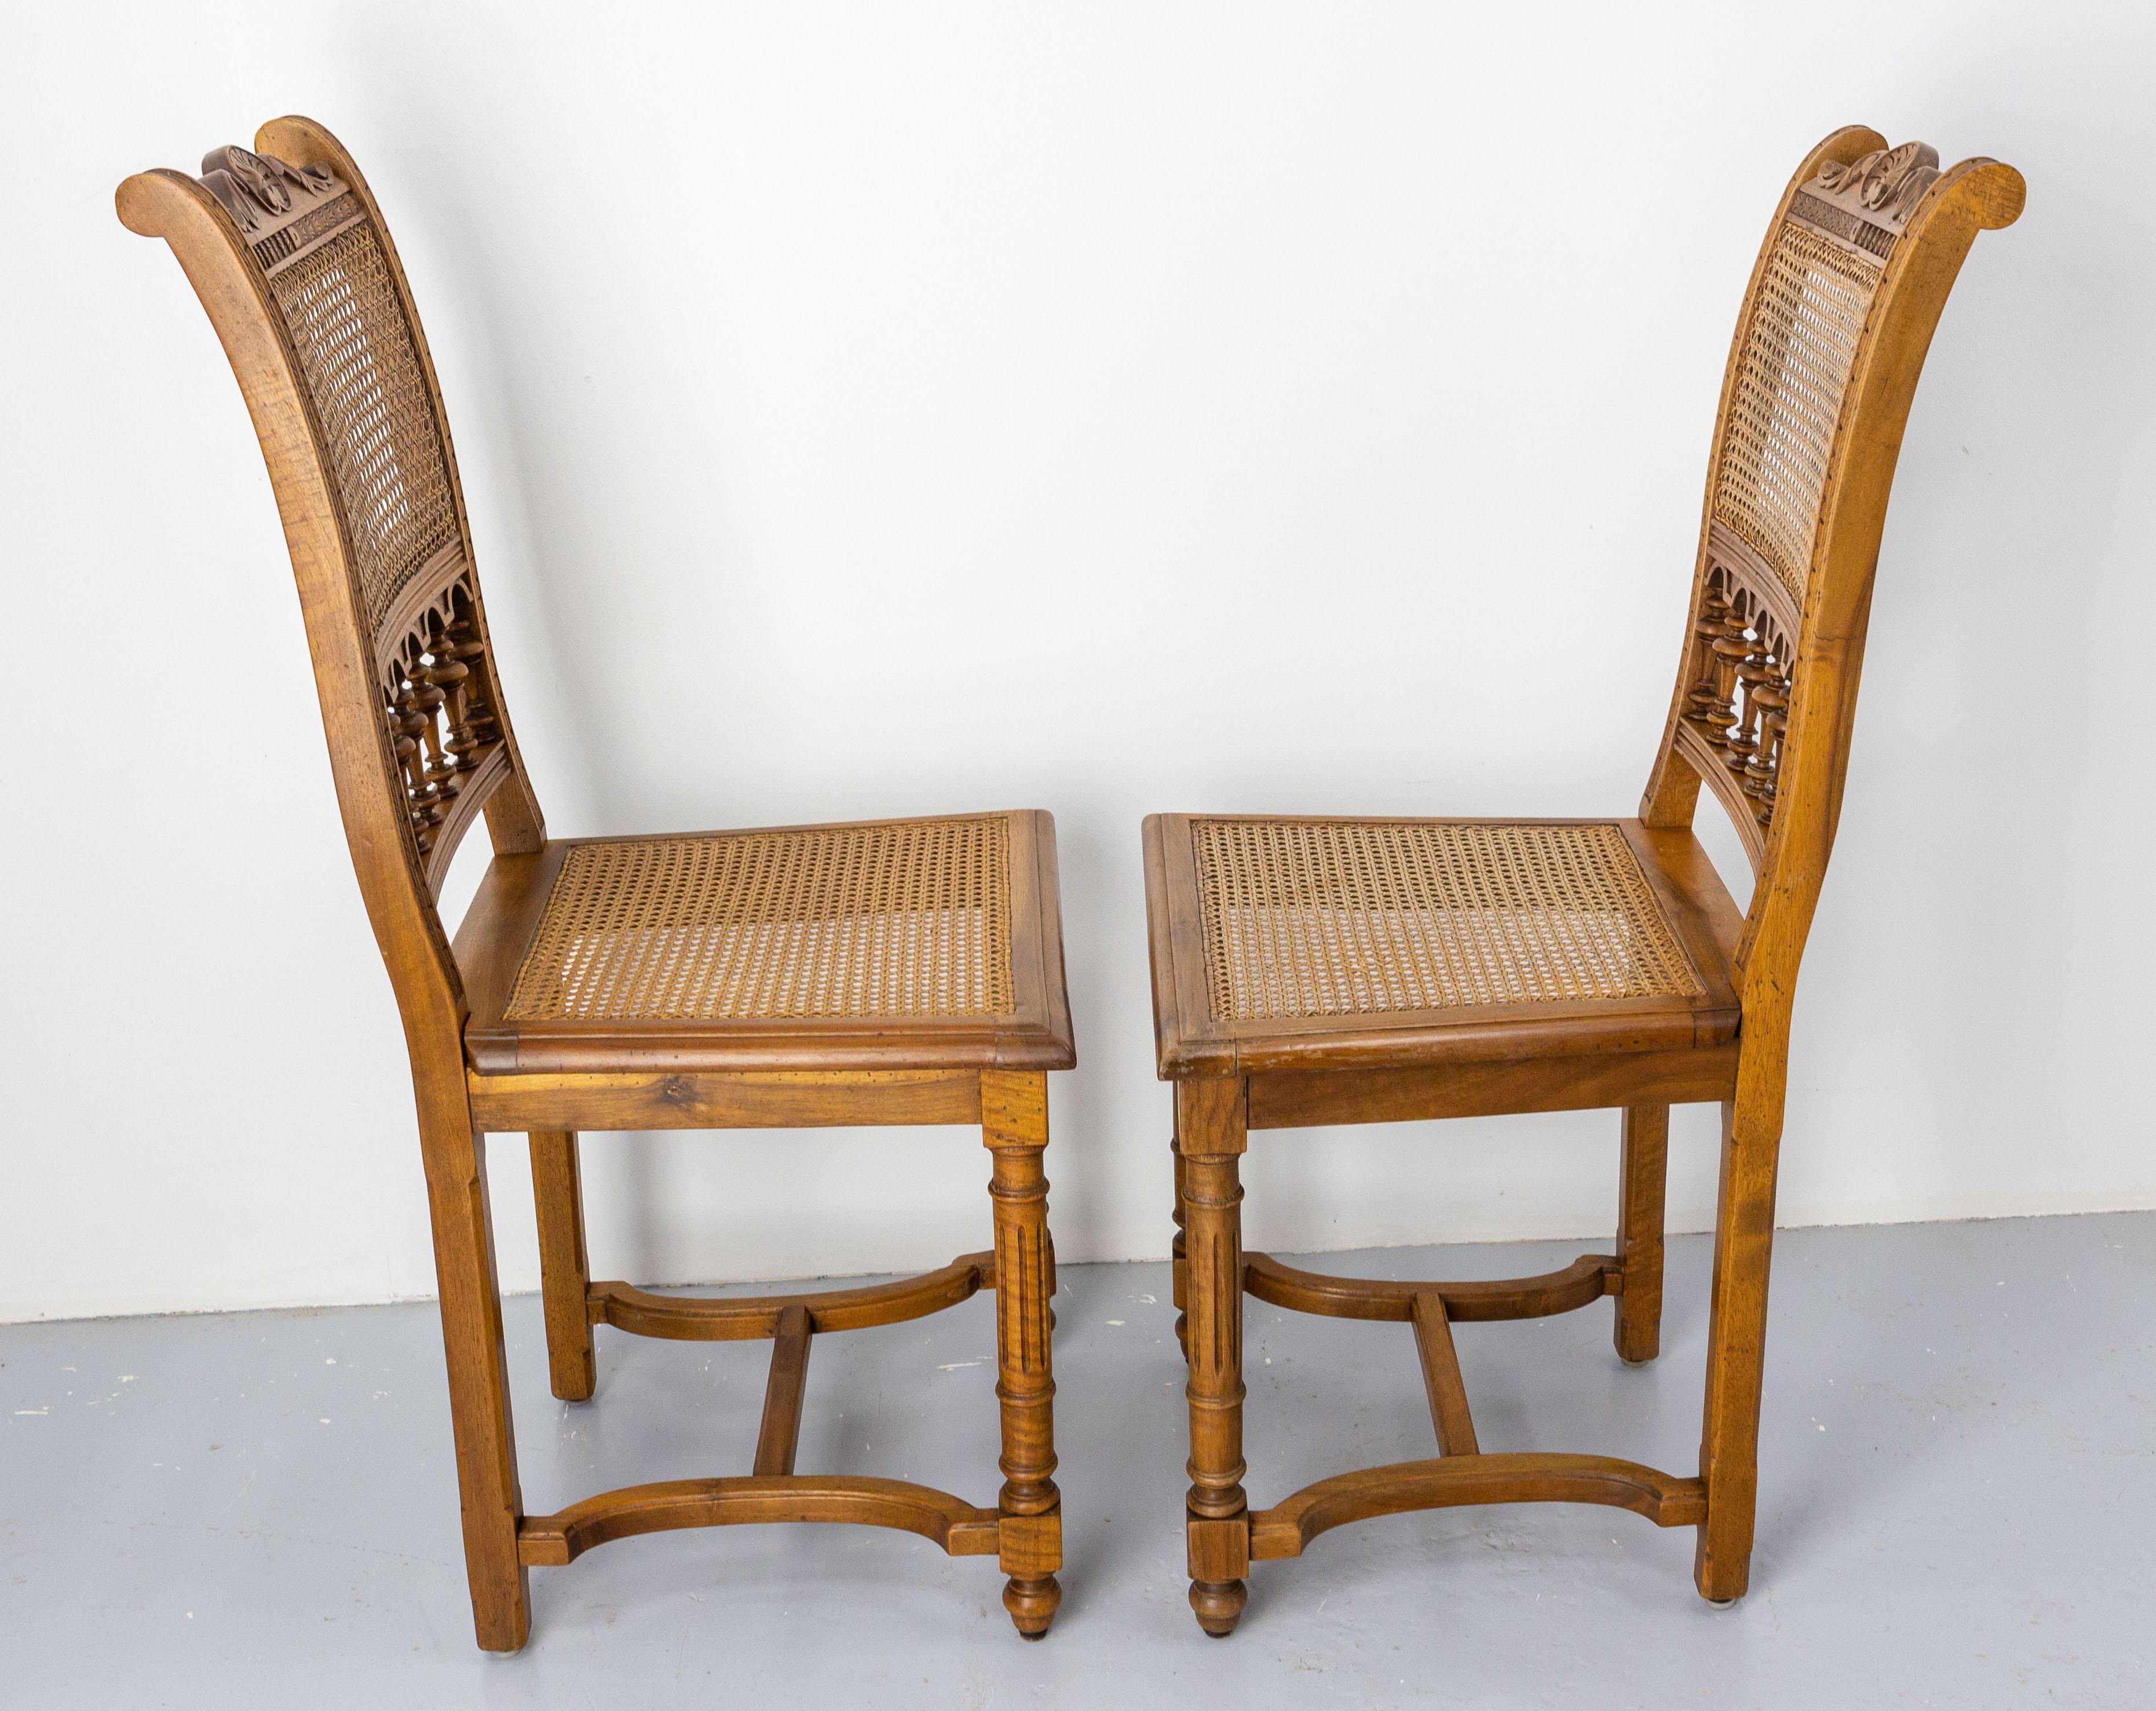 Four Chairs Walnut and Cane in the Louis XIII Style, French, circa 1900 For Sale 1